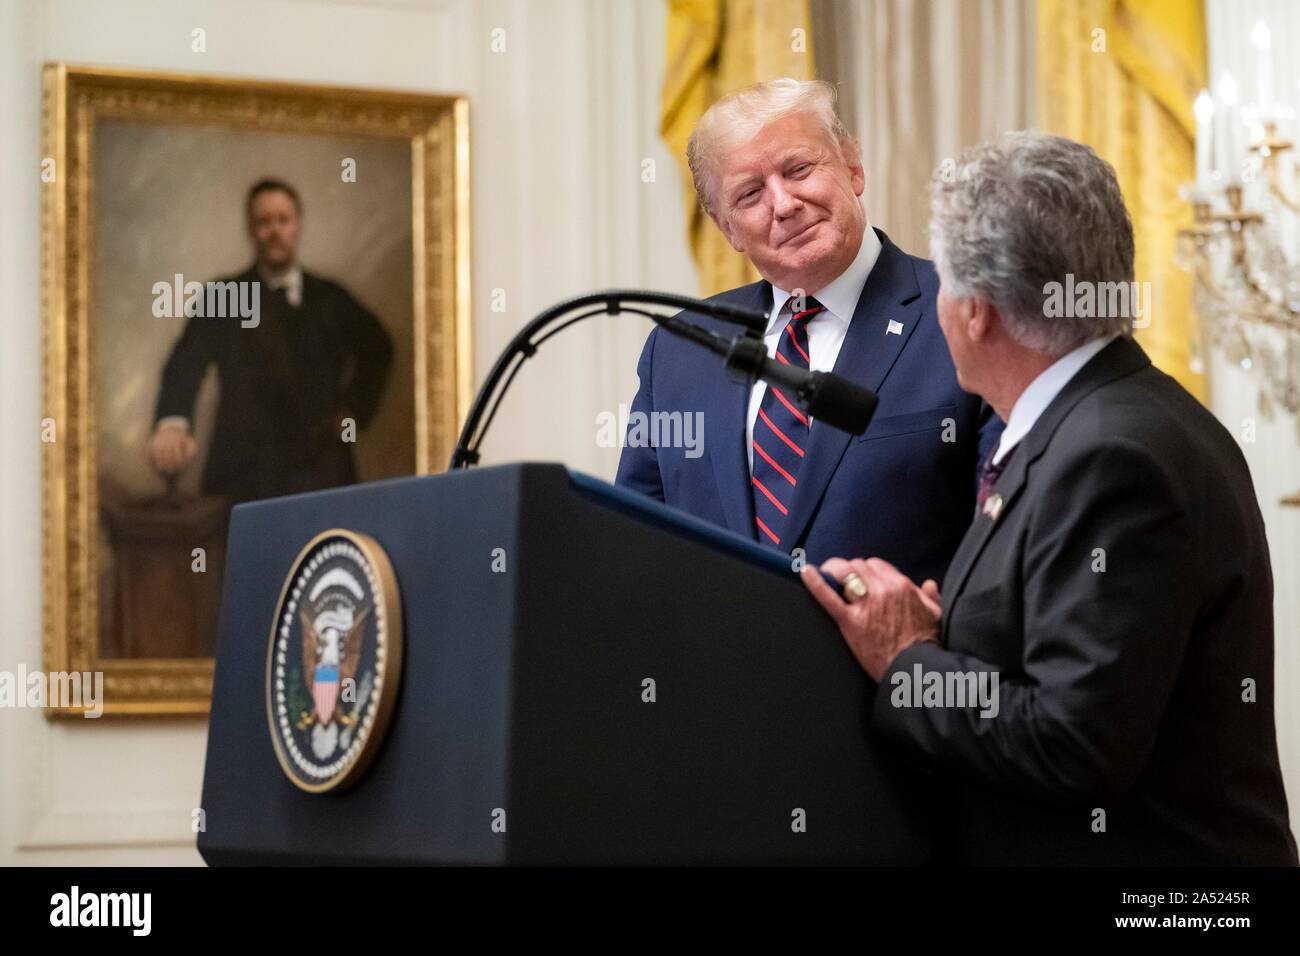 Washington, United States of America. 16 October, 2019. U.S President Donald Trump, left, smiles as he welcomes legendary race car driver Mario Andretti to the podium during a reception in honor of Italian President Sergio Mattarella in the East Room of the White House October 16, 2019 in Washington, DC. Credit: Tia Dufour/White House Photo/Alamy Live News Stock Photo